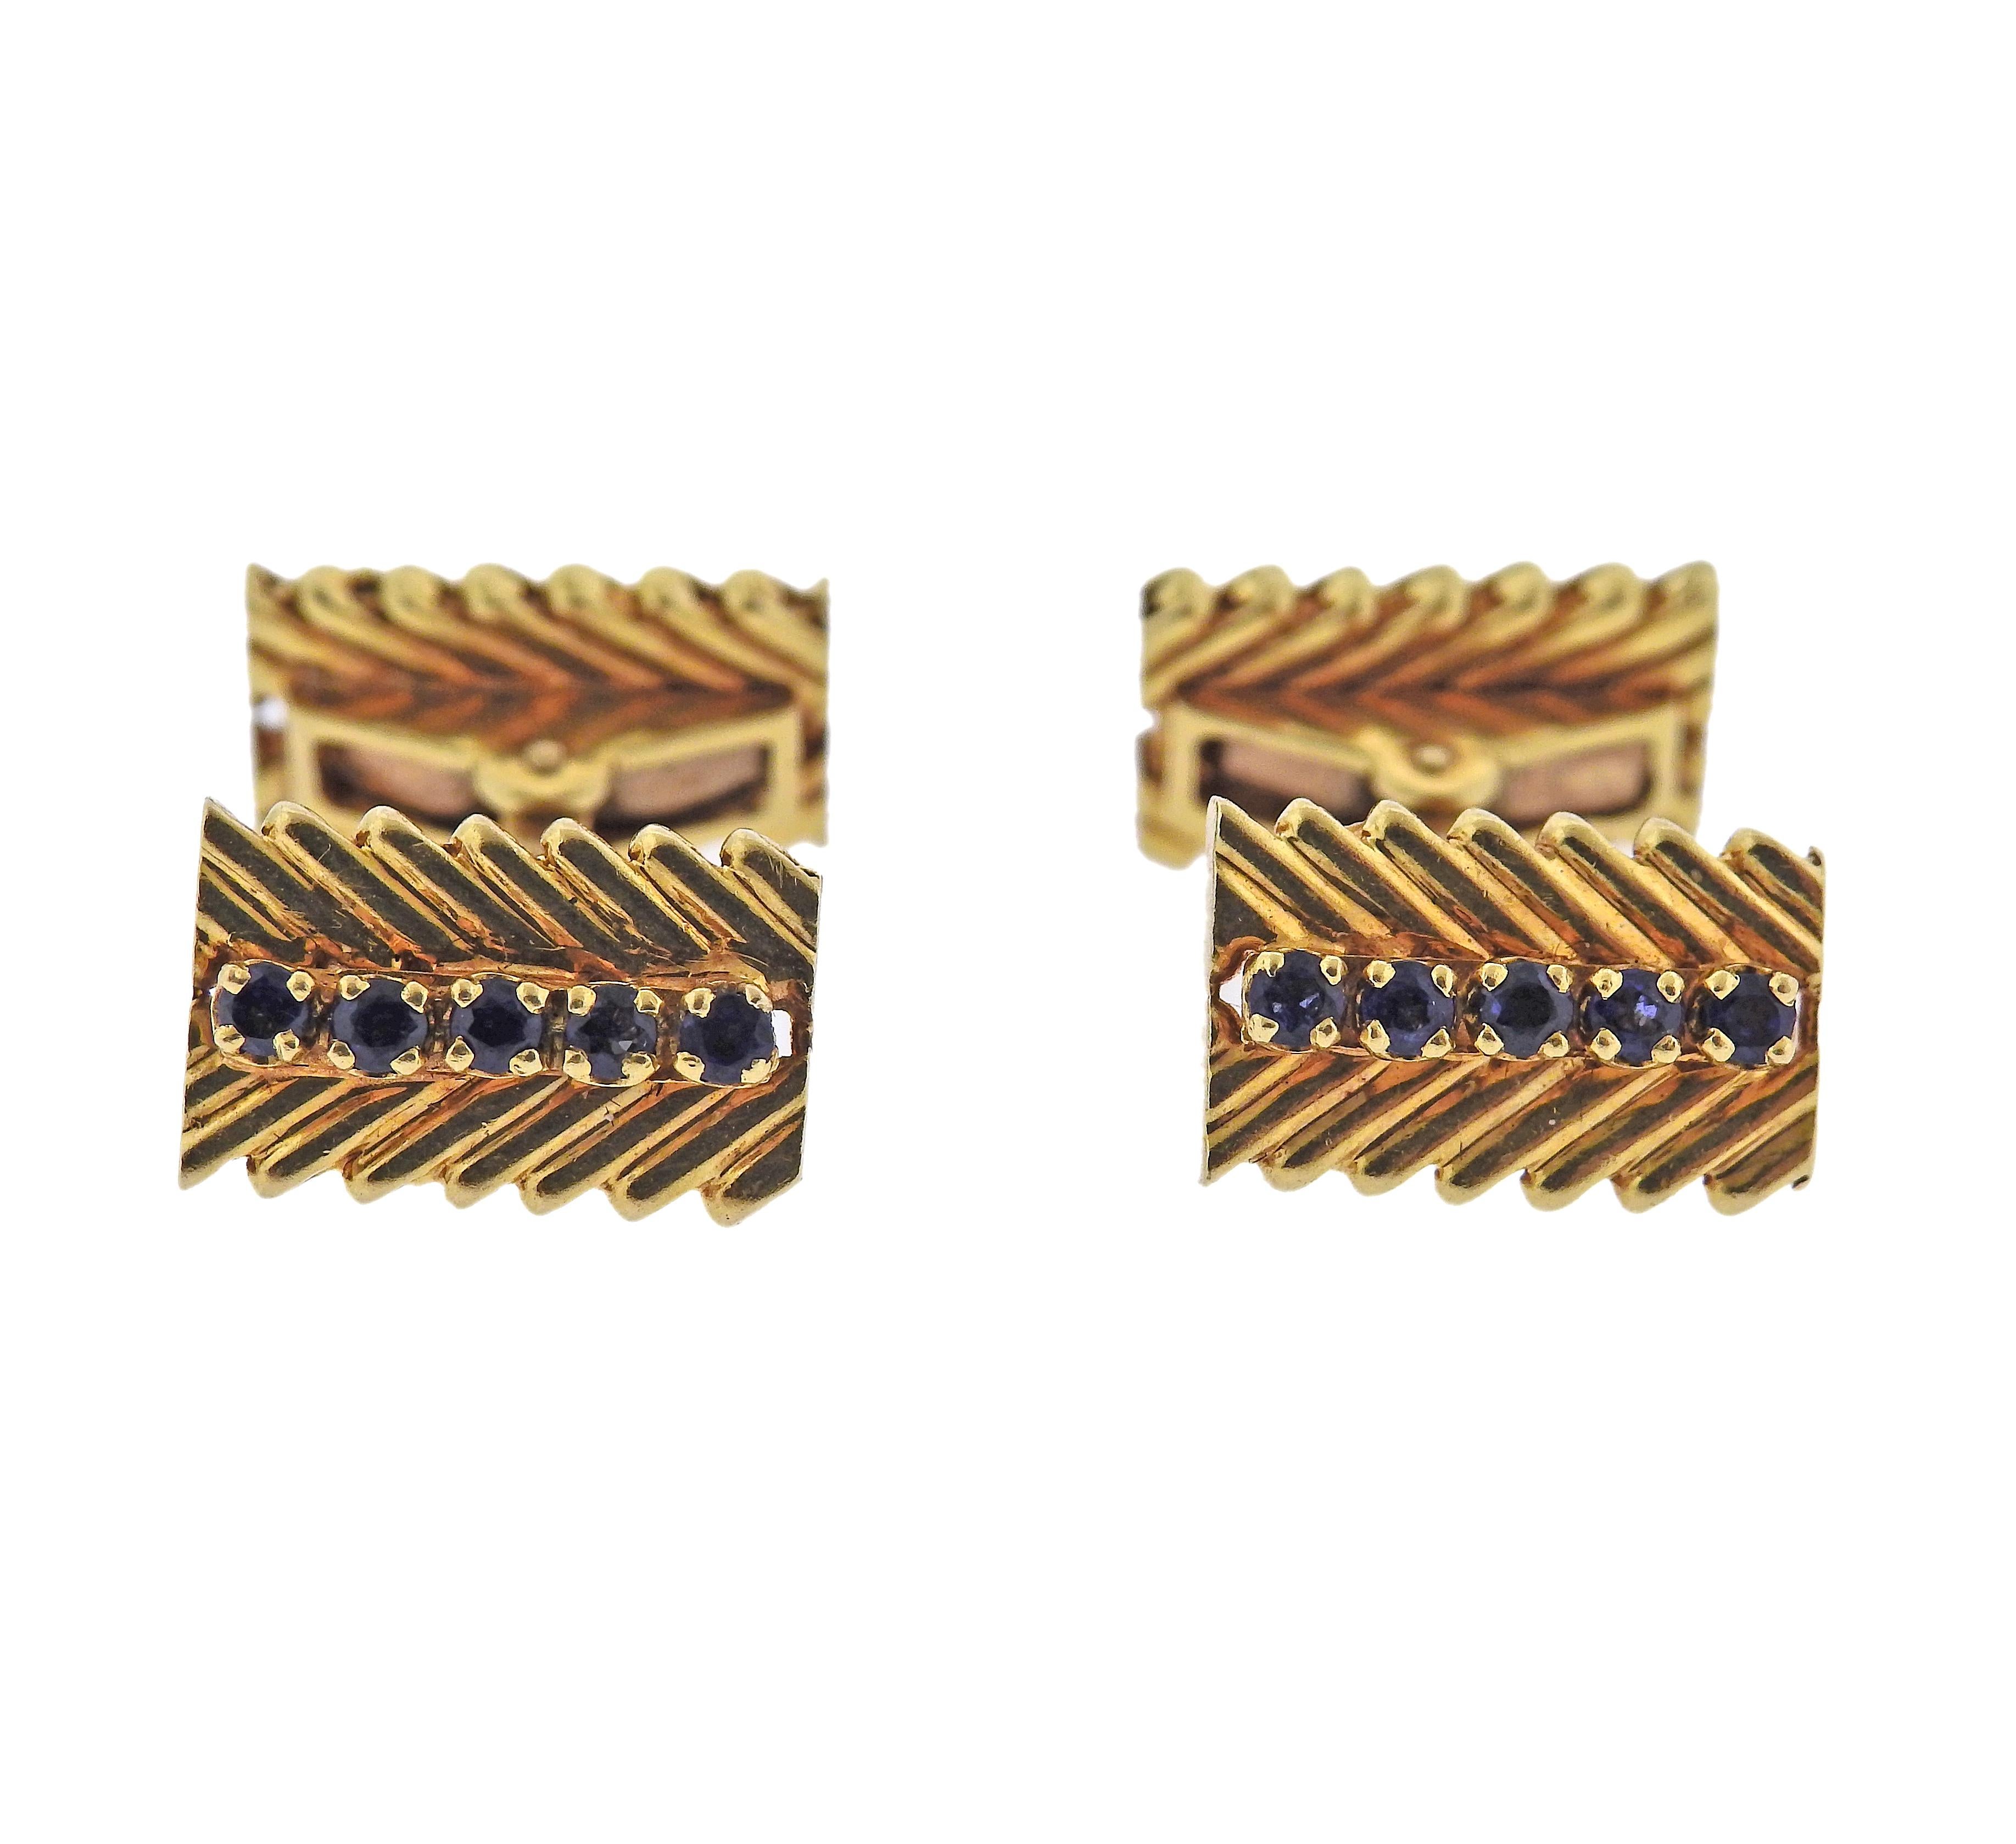 Pair of 1960s 18k gold cufflinks by Van Cleef & Aprles, with blue sapphires. Each top is 15mm x 10mm. Marked: Van Cleef & Arpels, NY, 12 V 25.16, 18k. Weight - 16.8 grams.